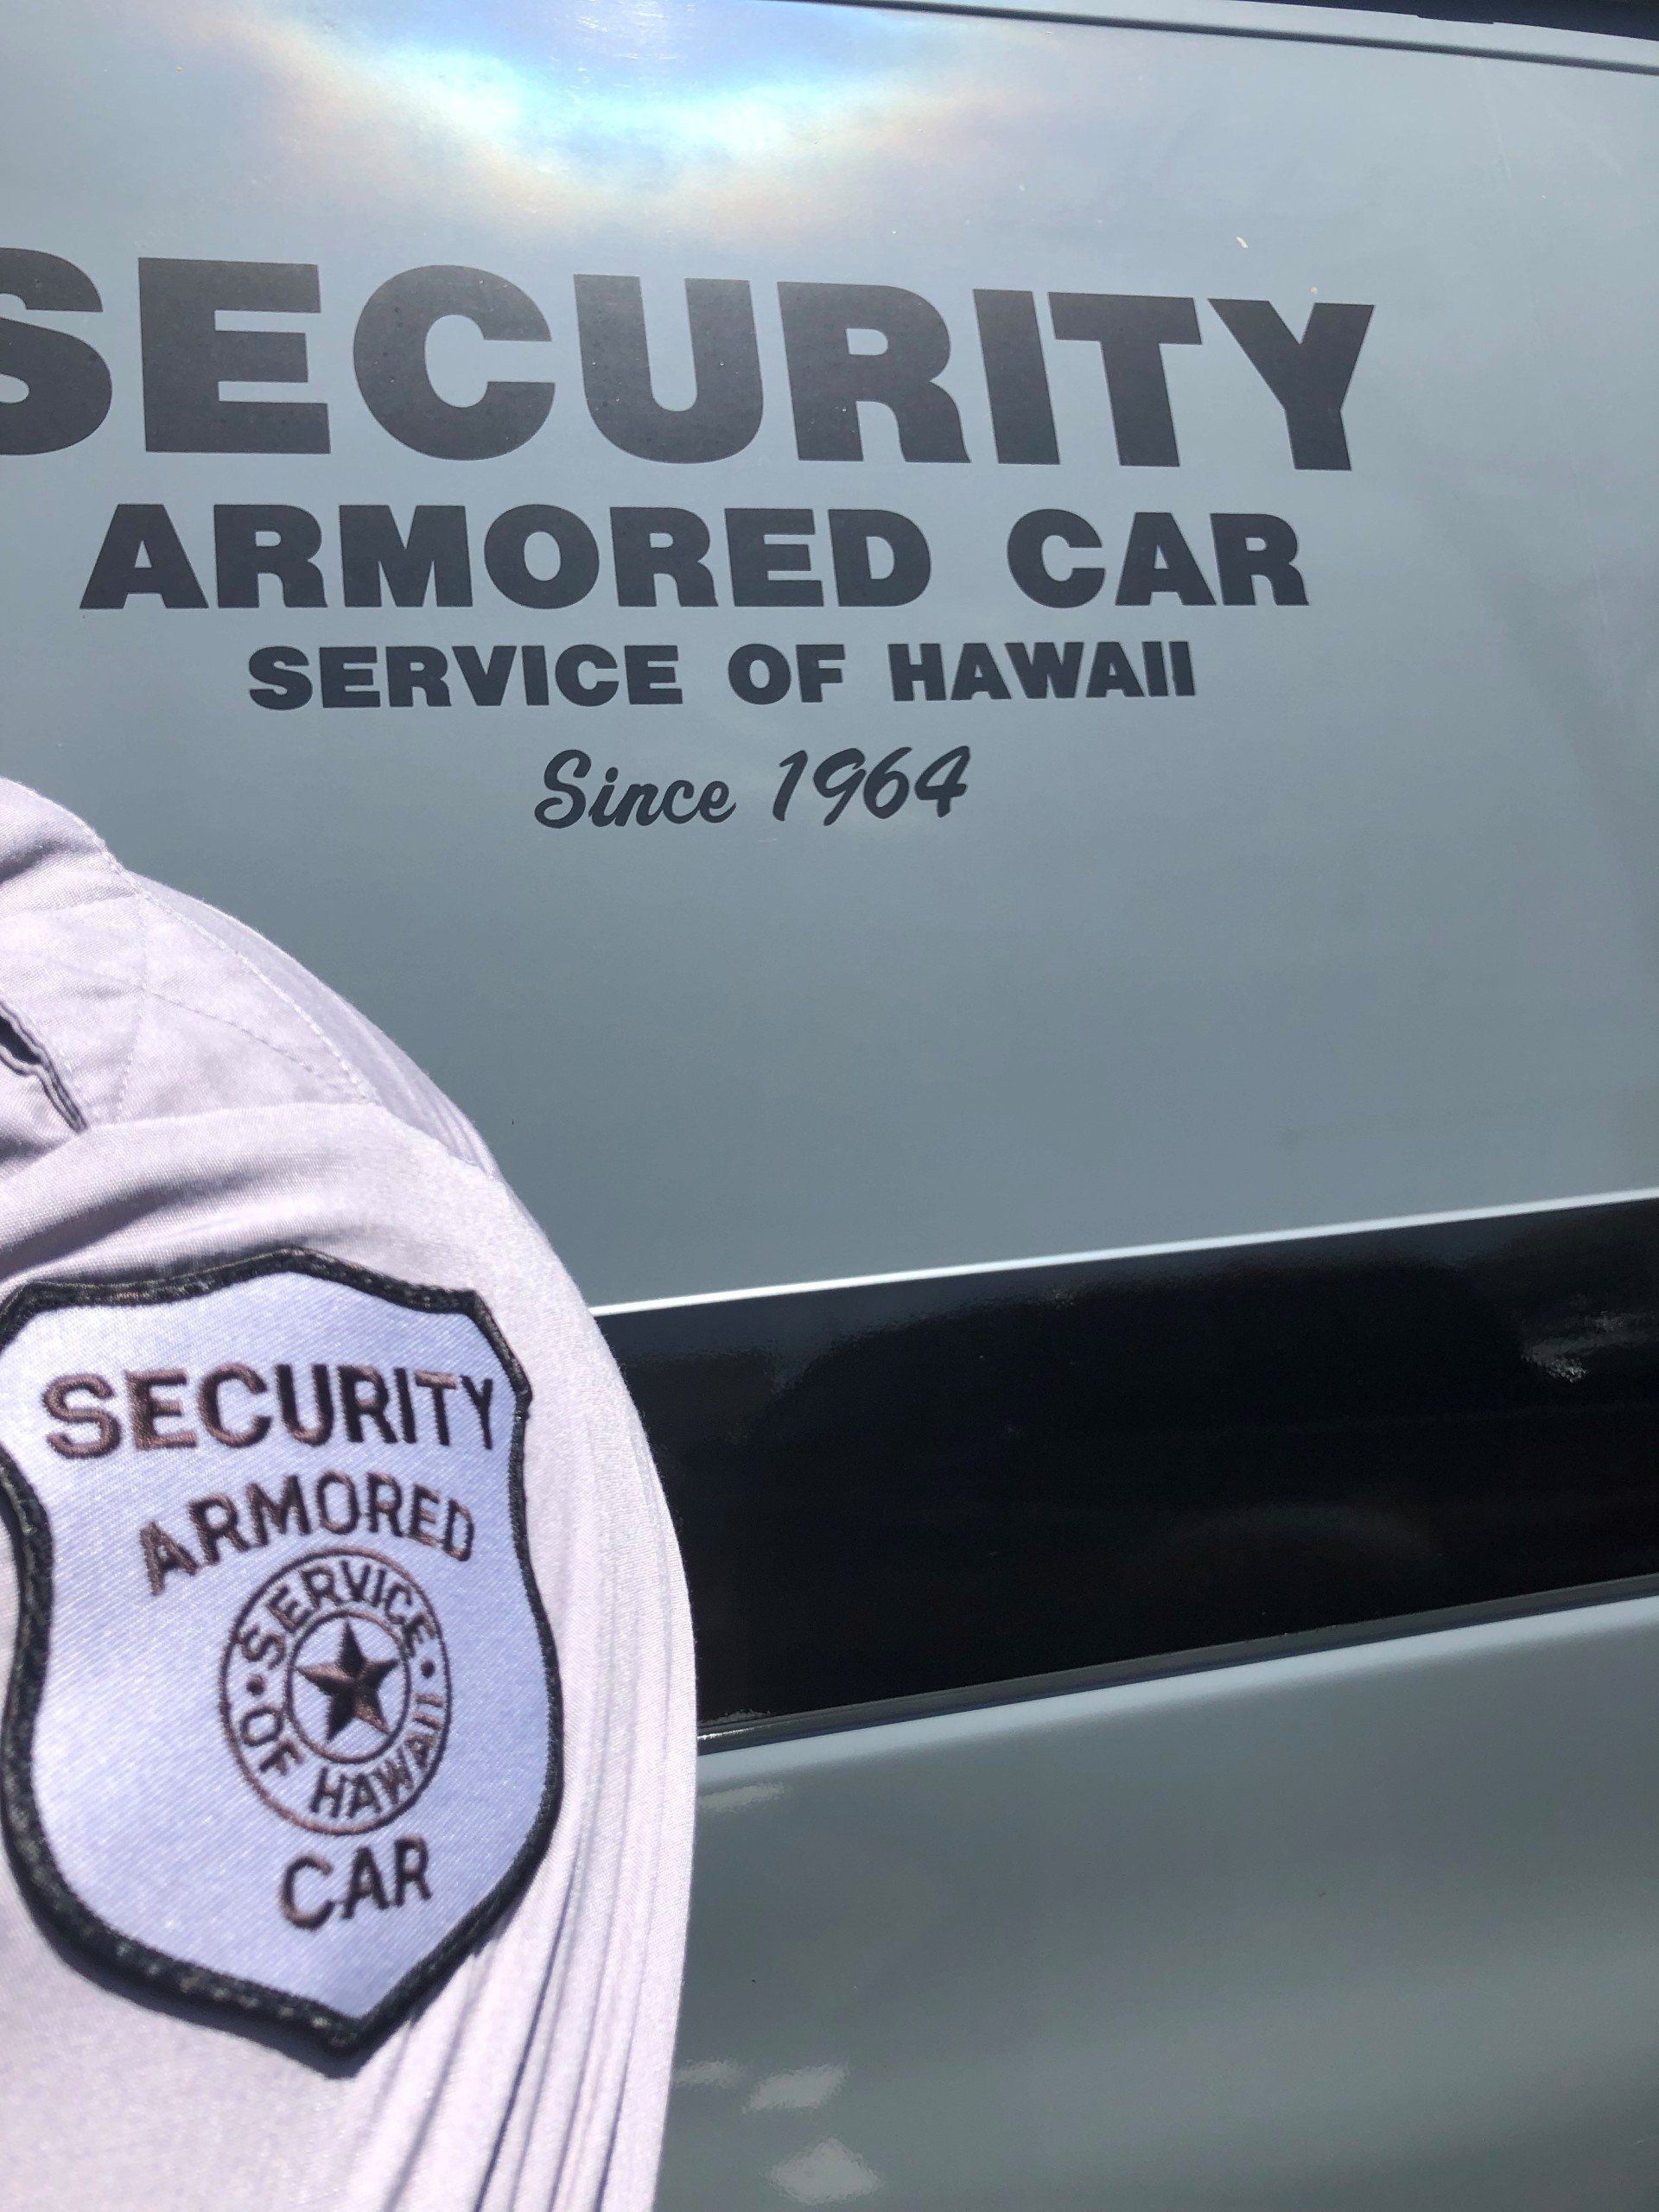 armored car delivery by security armored car service of hawaii